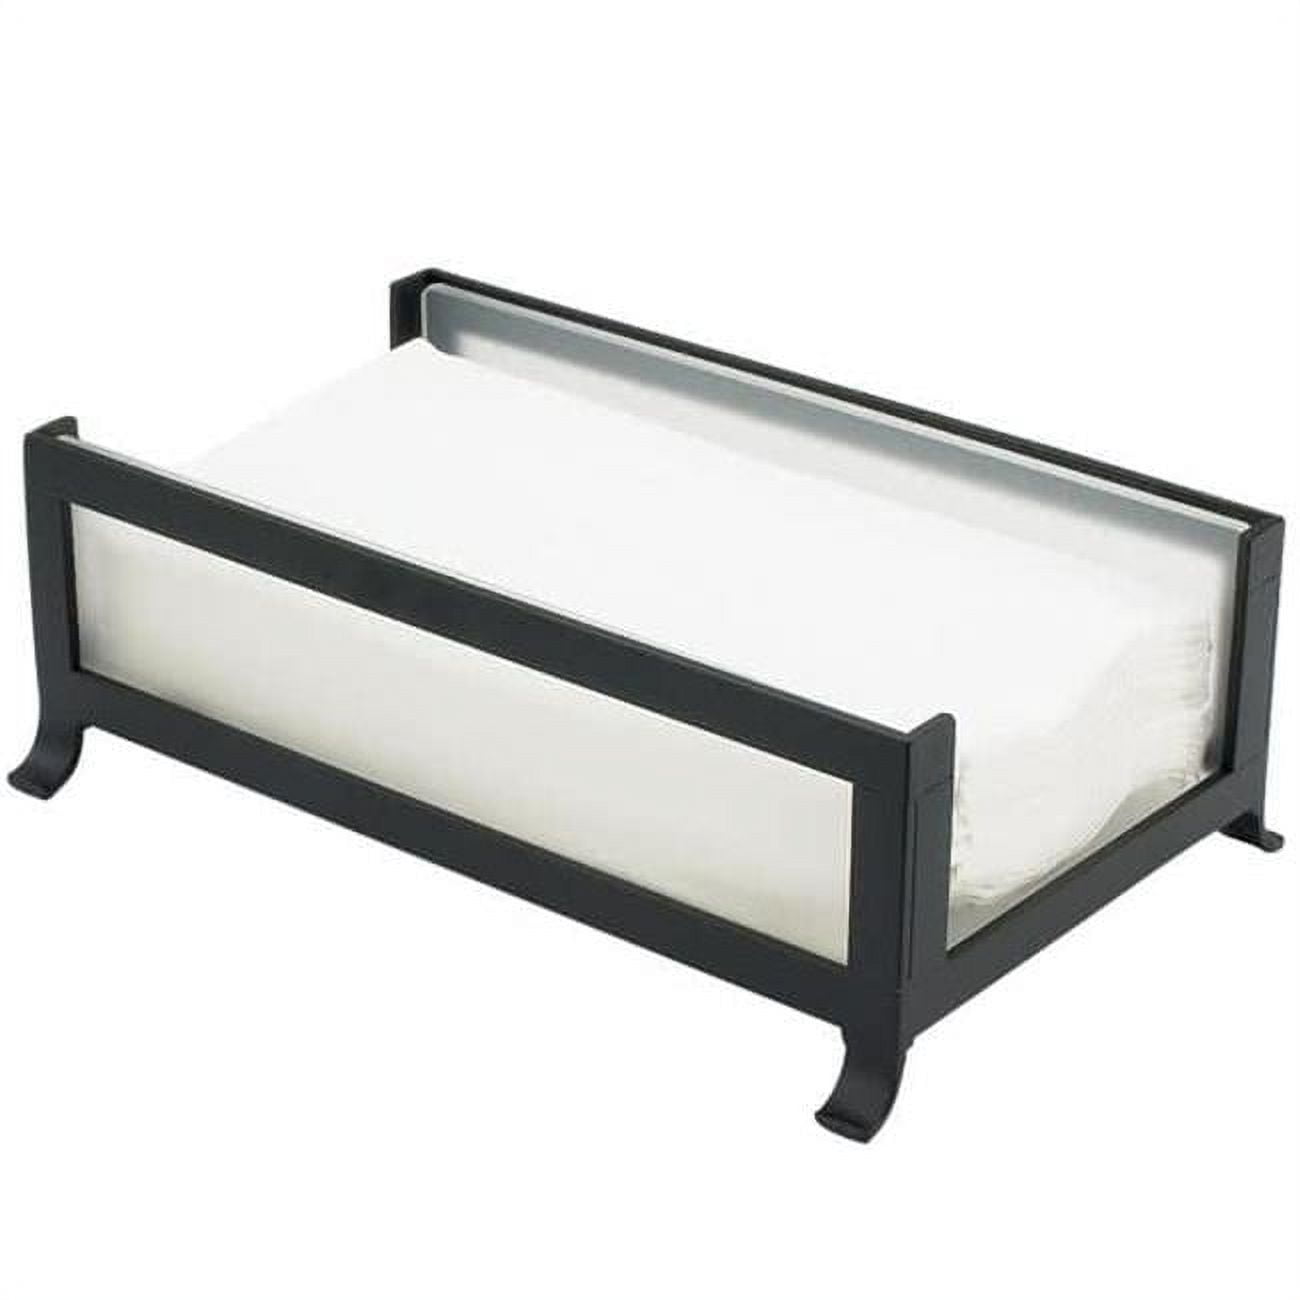 Picture of Cal Mil 1588-33 Soho Black Napkin Holder with Frosted Glass Sides - 9.375 x 6.25 x 3.5 in.